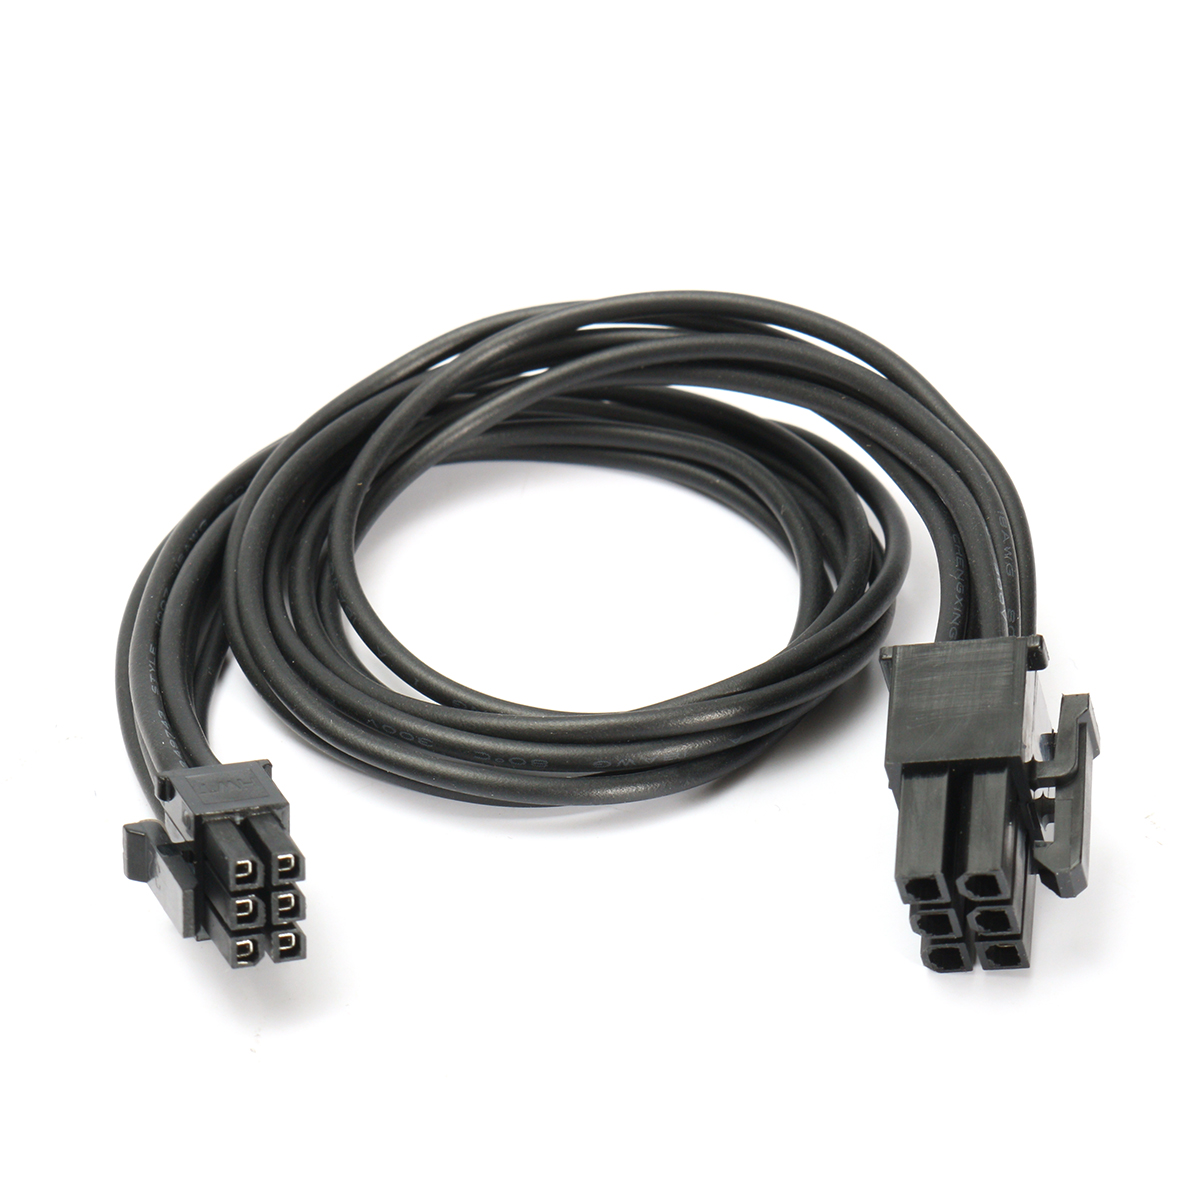 30cm1181-Inch-Details-About-Mini-6-Pin-to-PCI-E-6PIN-Graphics-Video-Card-Power-Cable-Cord-for-Mac-G5-1976031-6